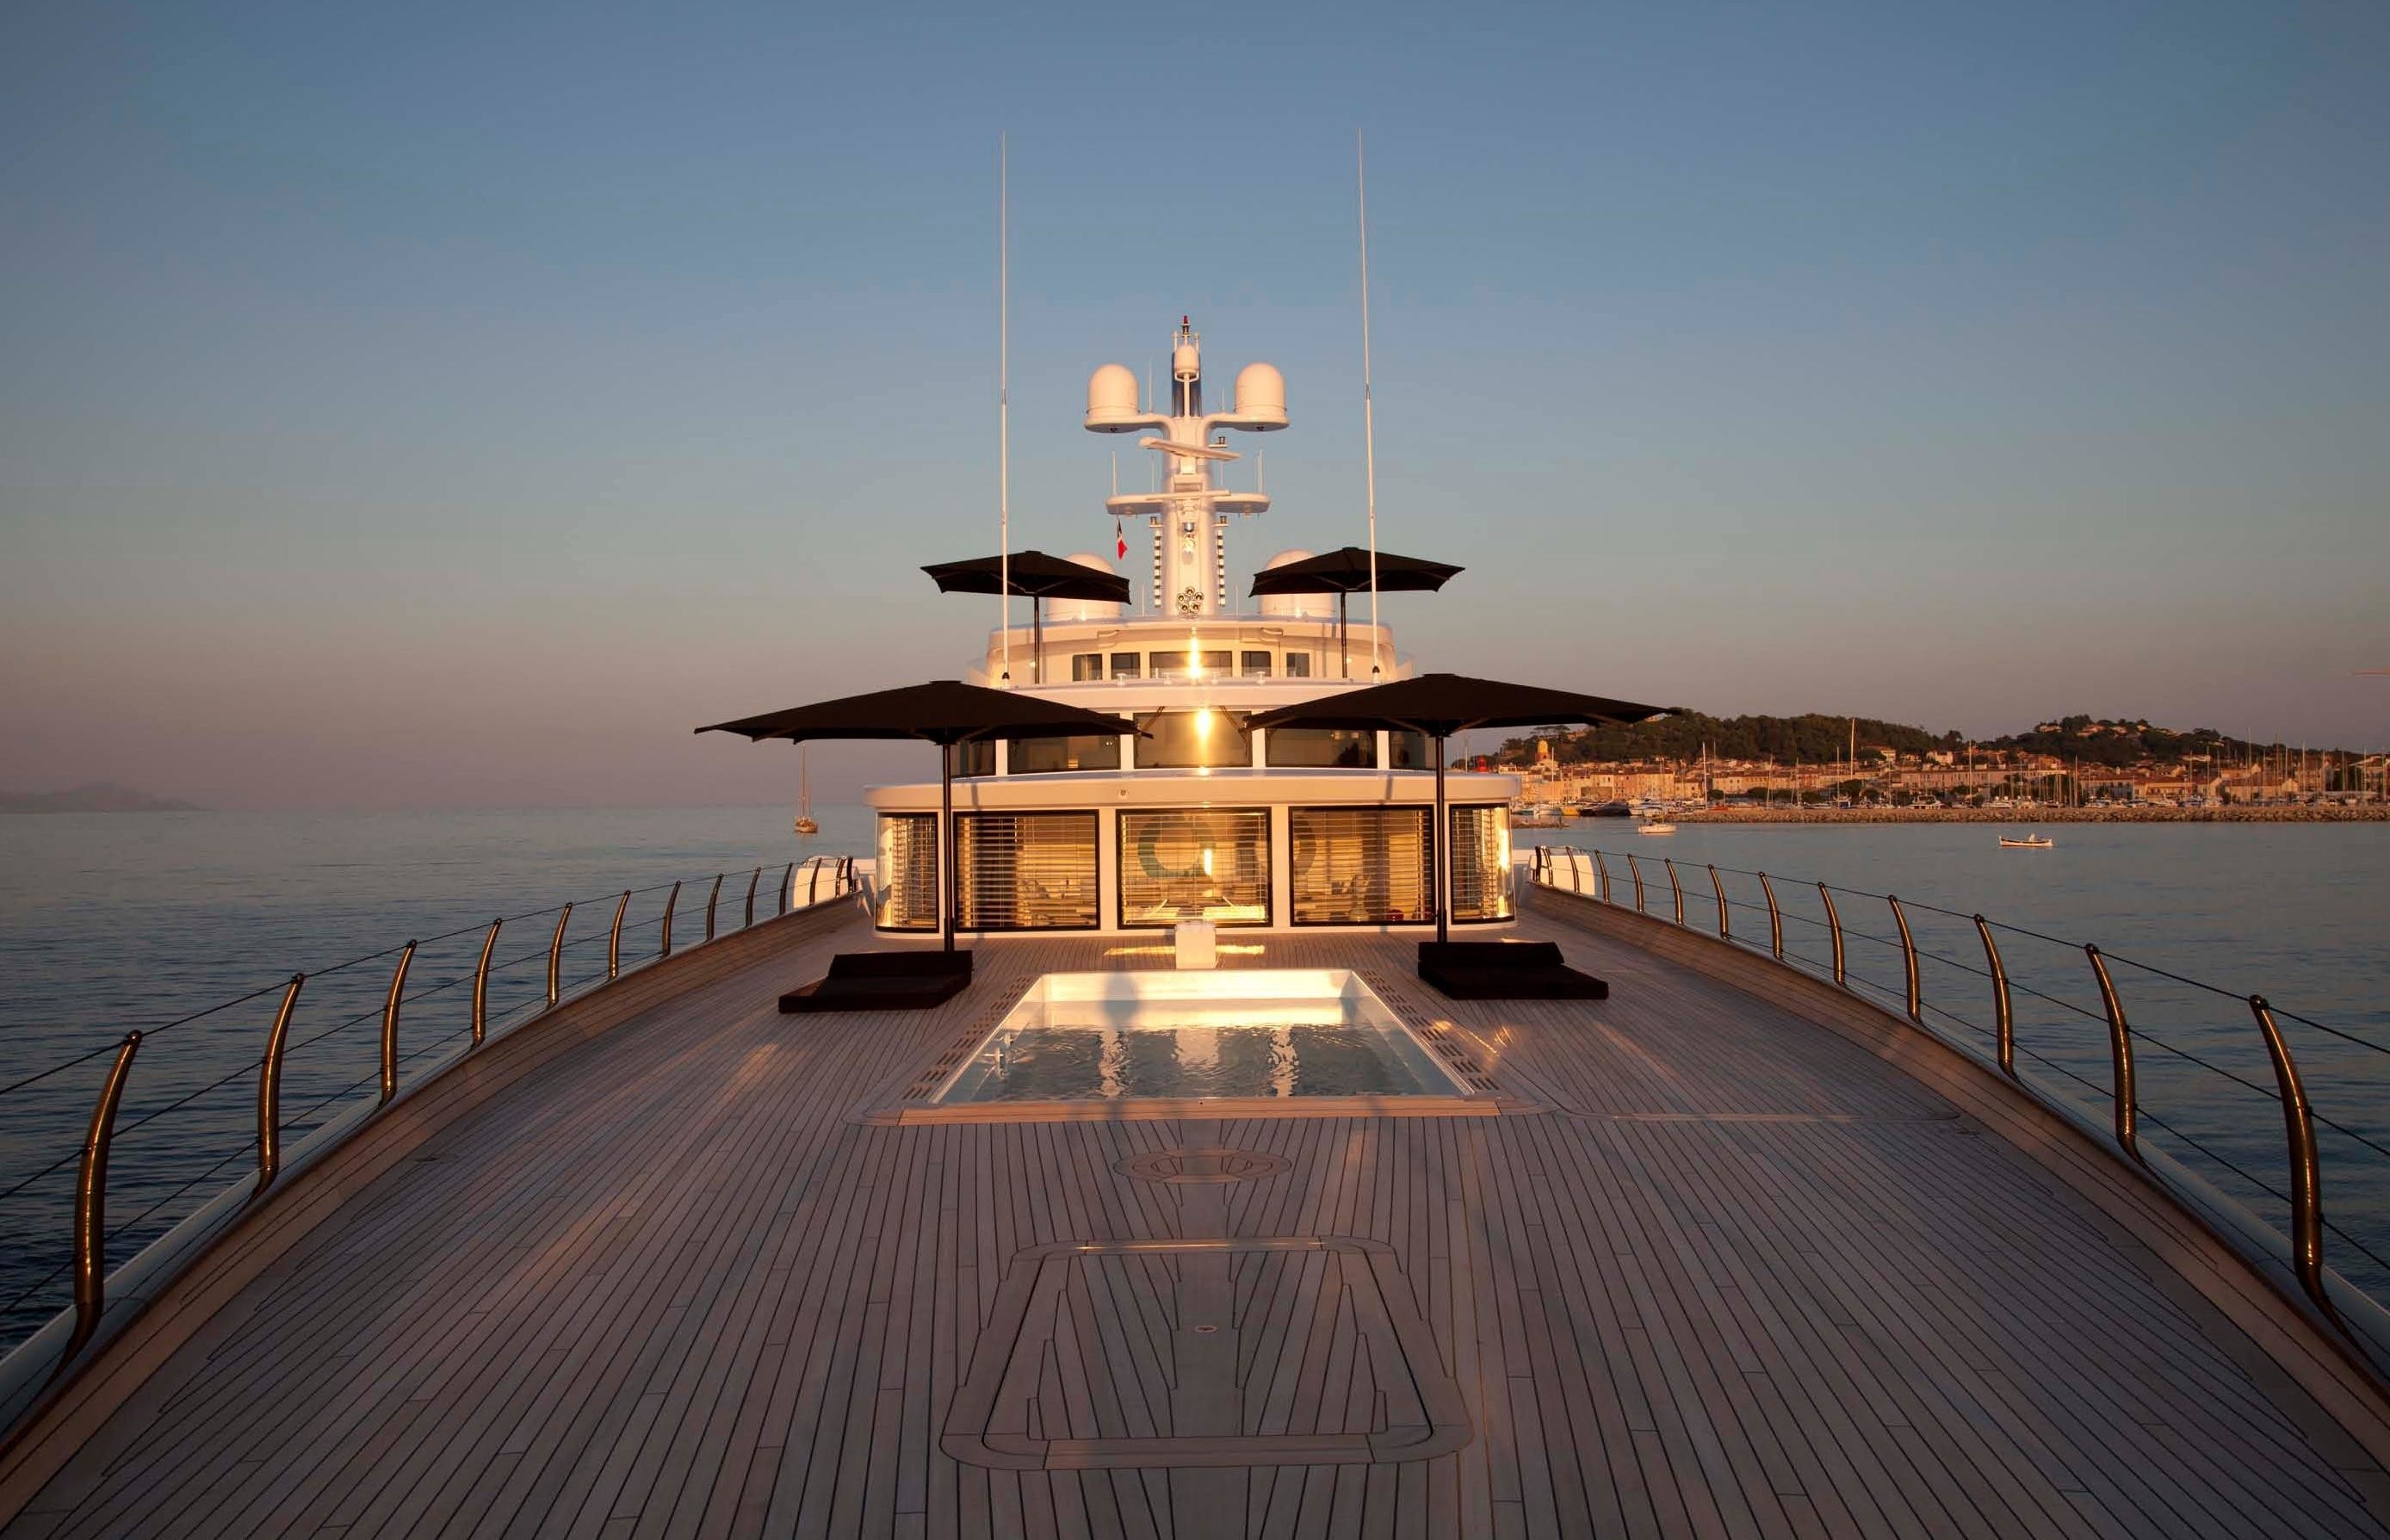 Fore Deck Aboard Yacht AIR in the Mediterranean